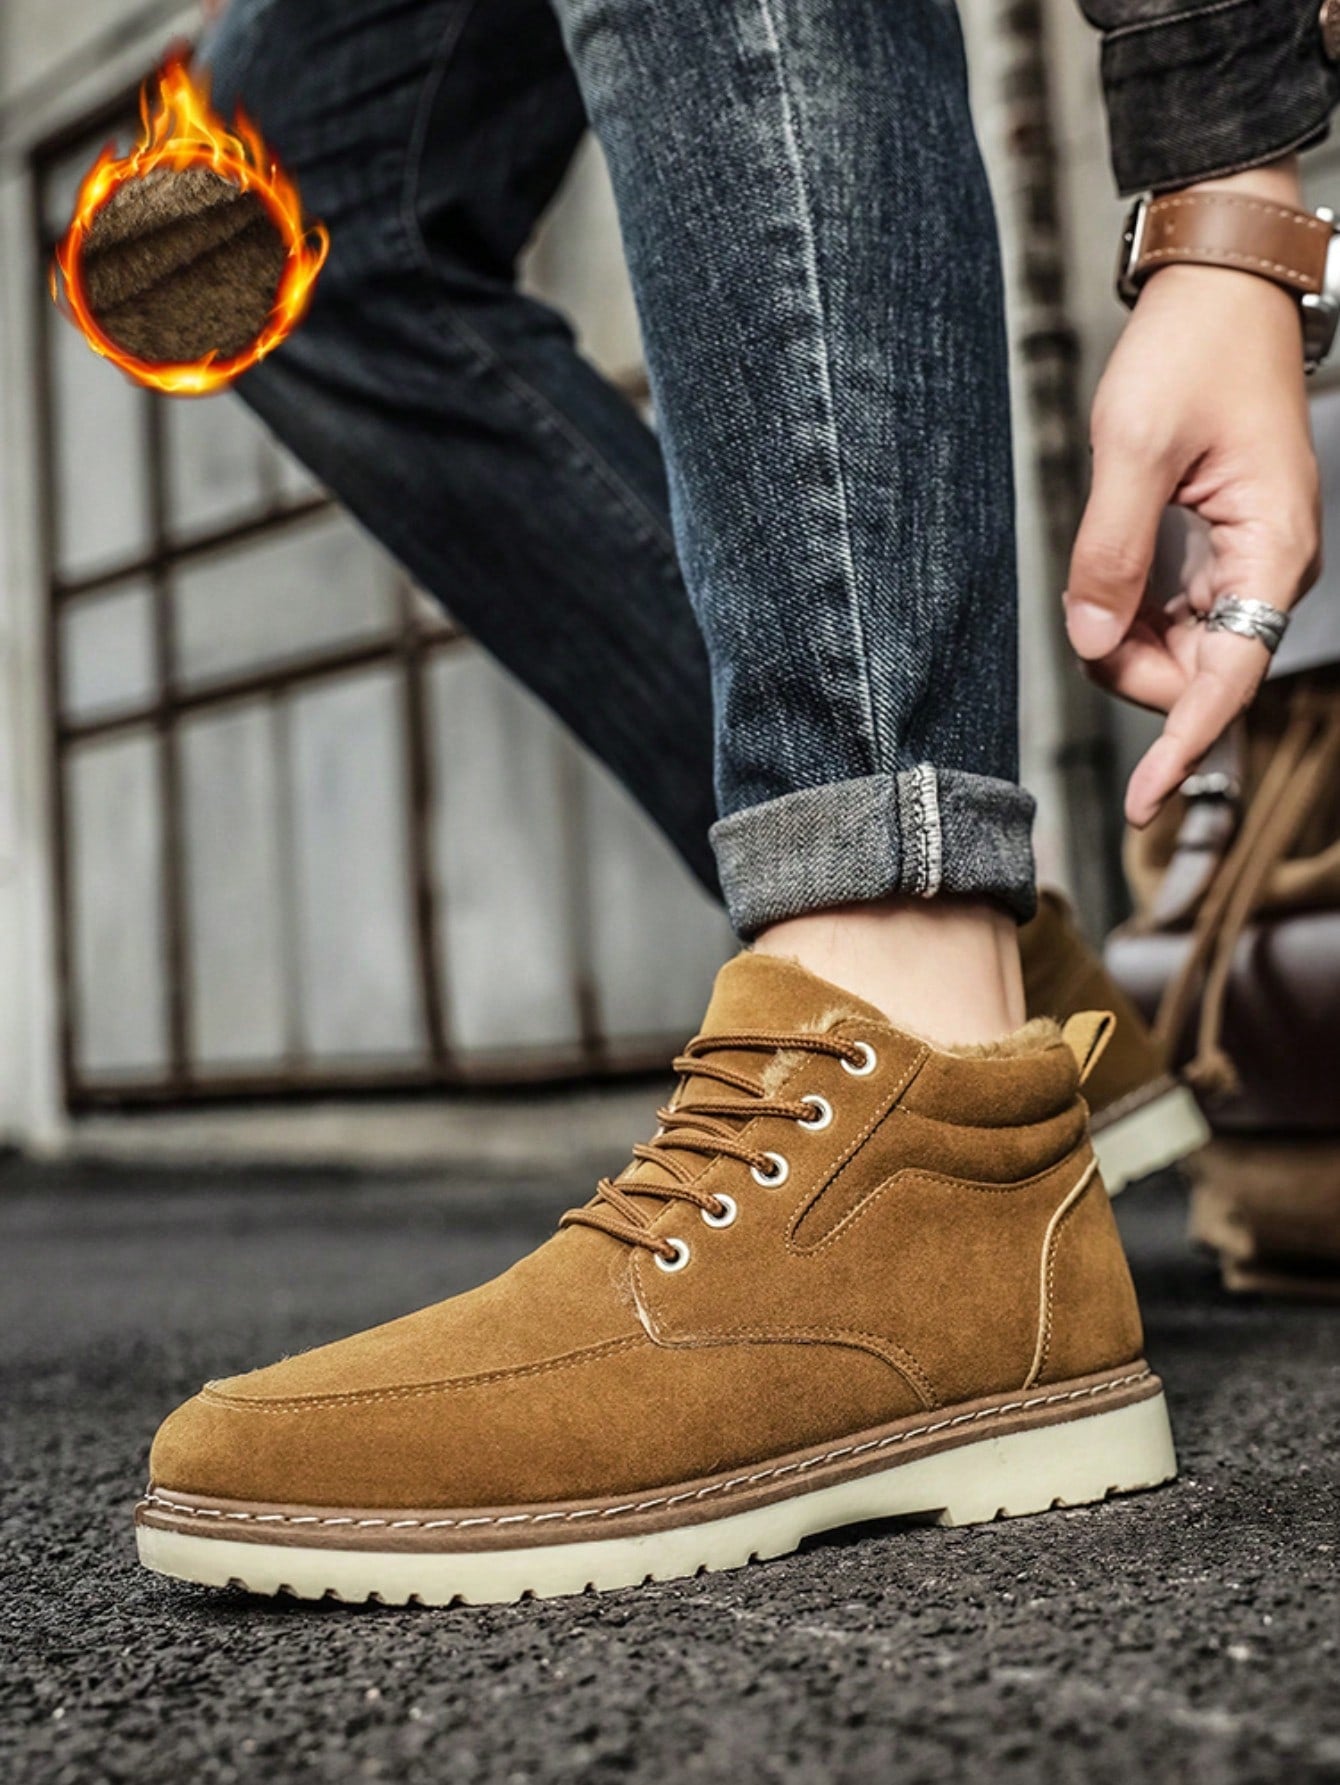 Men's Casual Pu Leather Athletic Shoes, Thick Sole Work Boot With Fleece Lining, Mid Top, Wear-resistant, Retro Lace-up Shoes For Winter